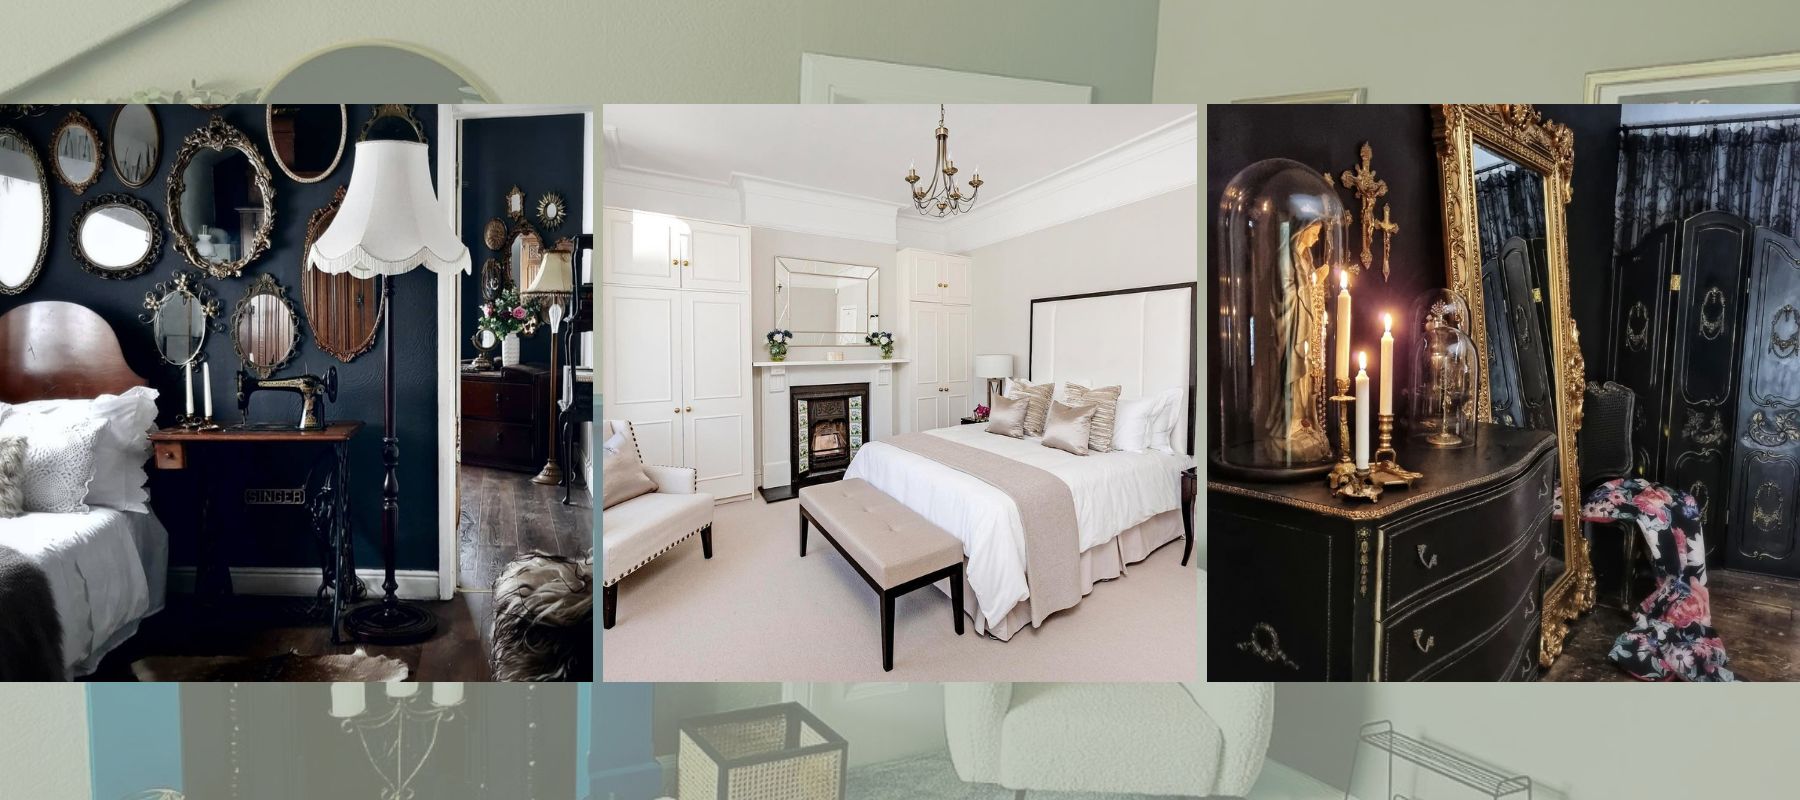 For An Opulent Interior Design: Stylish Victorian-Inspired Bedroom Ideas for the Modern Home